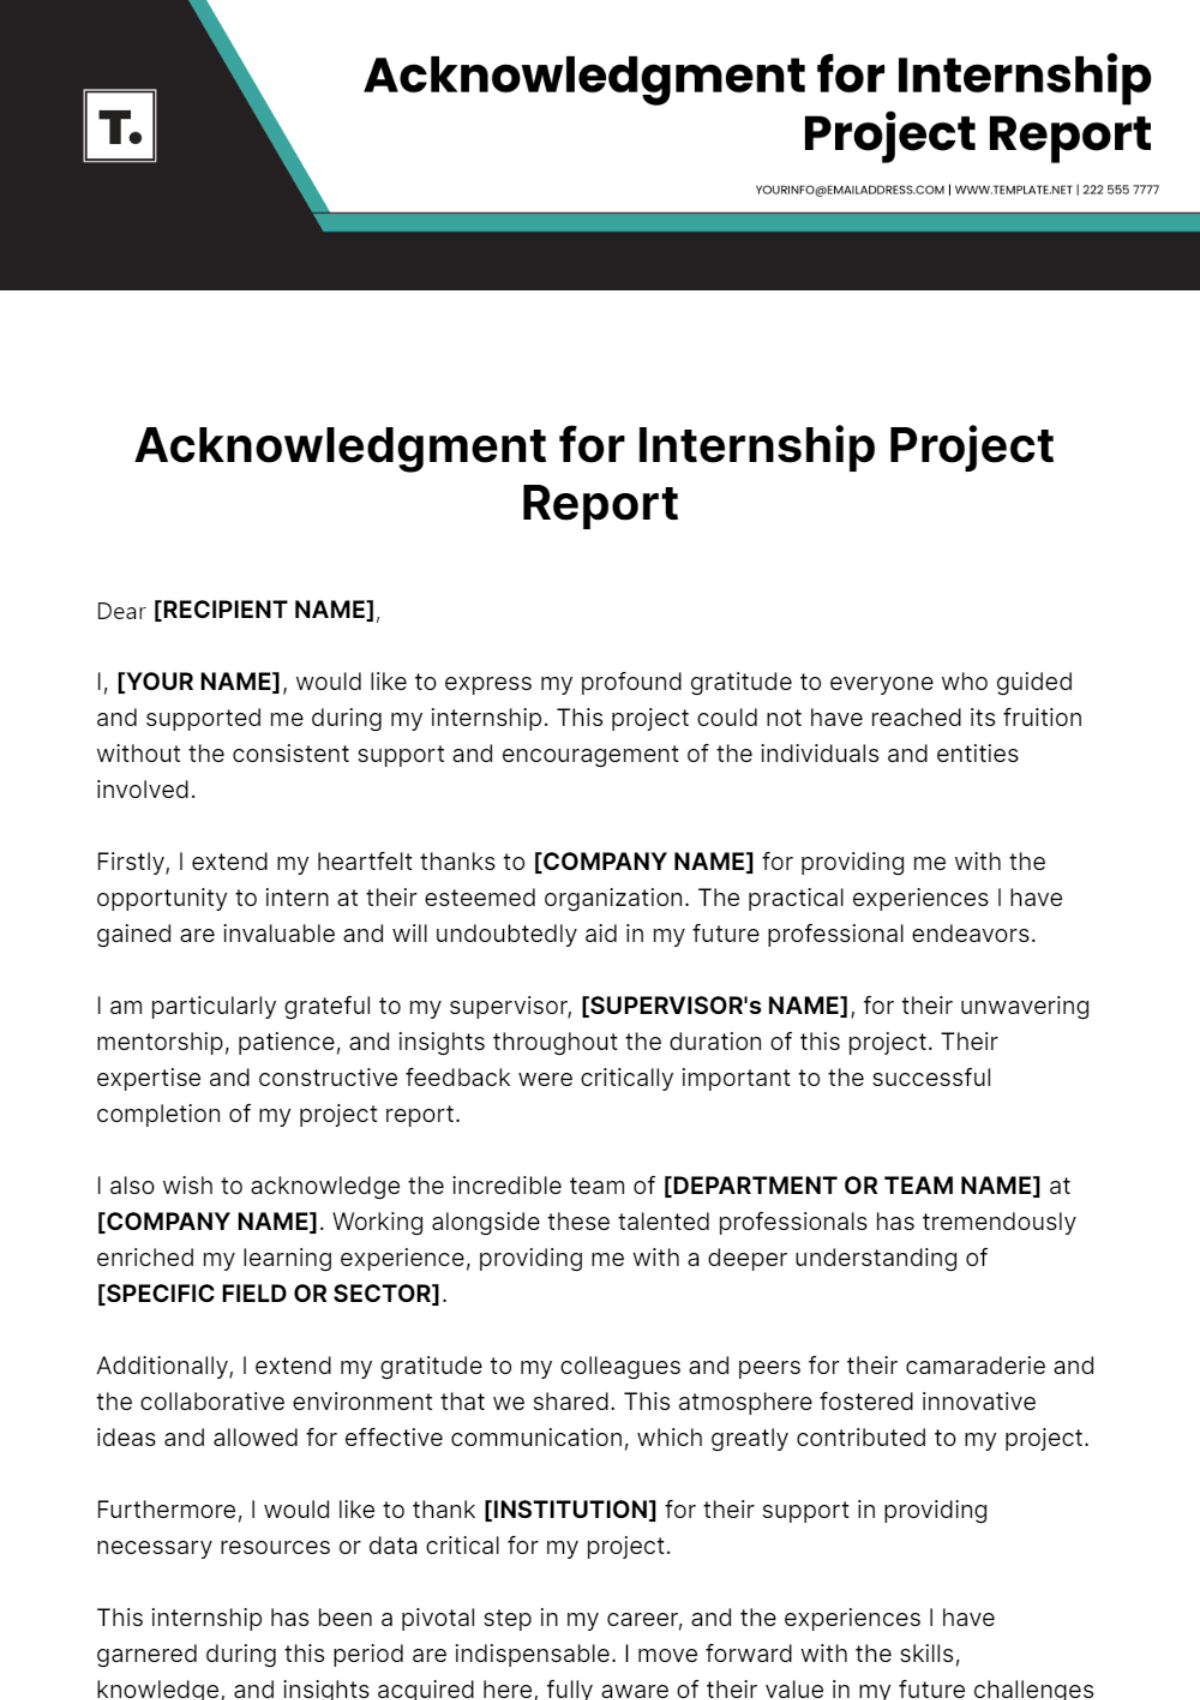 Acknowledgment For Internship Project Report Template